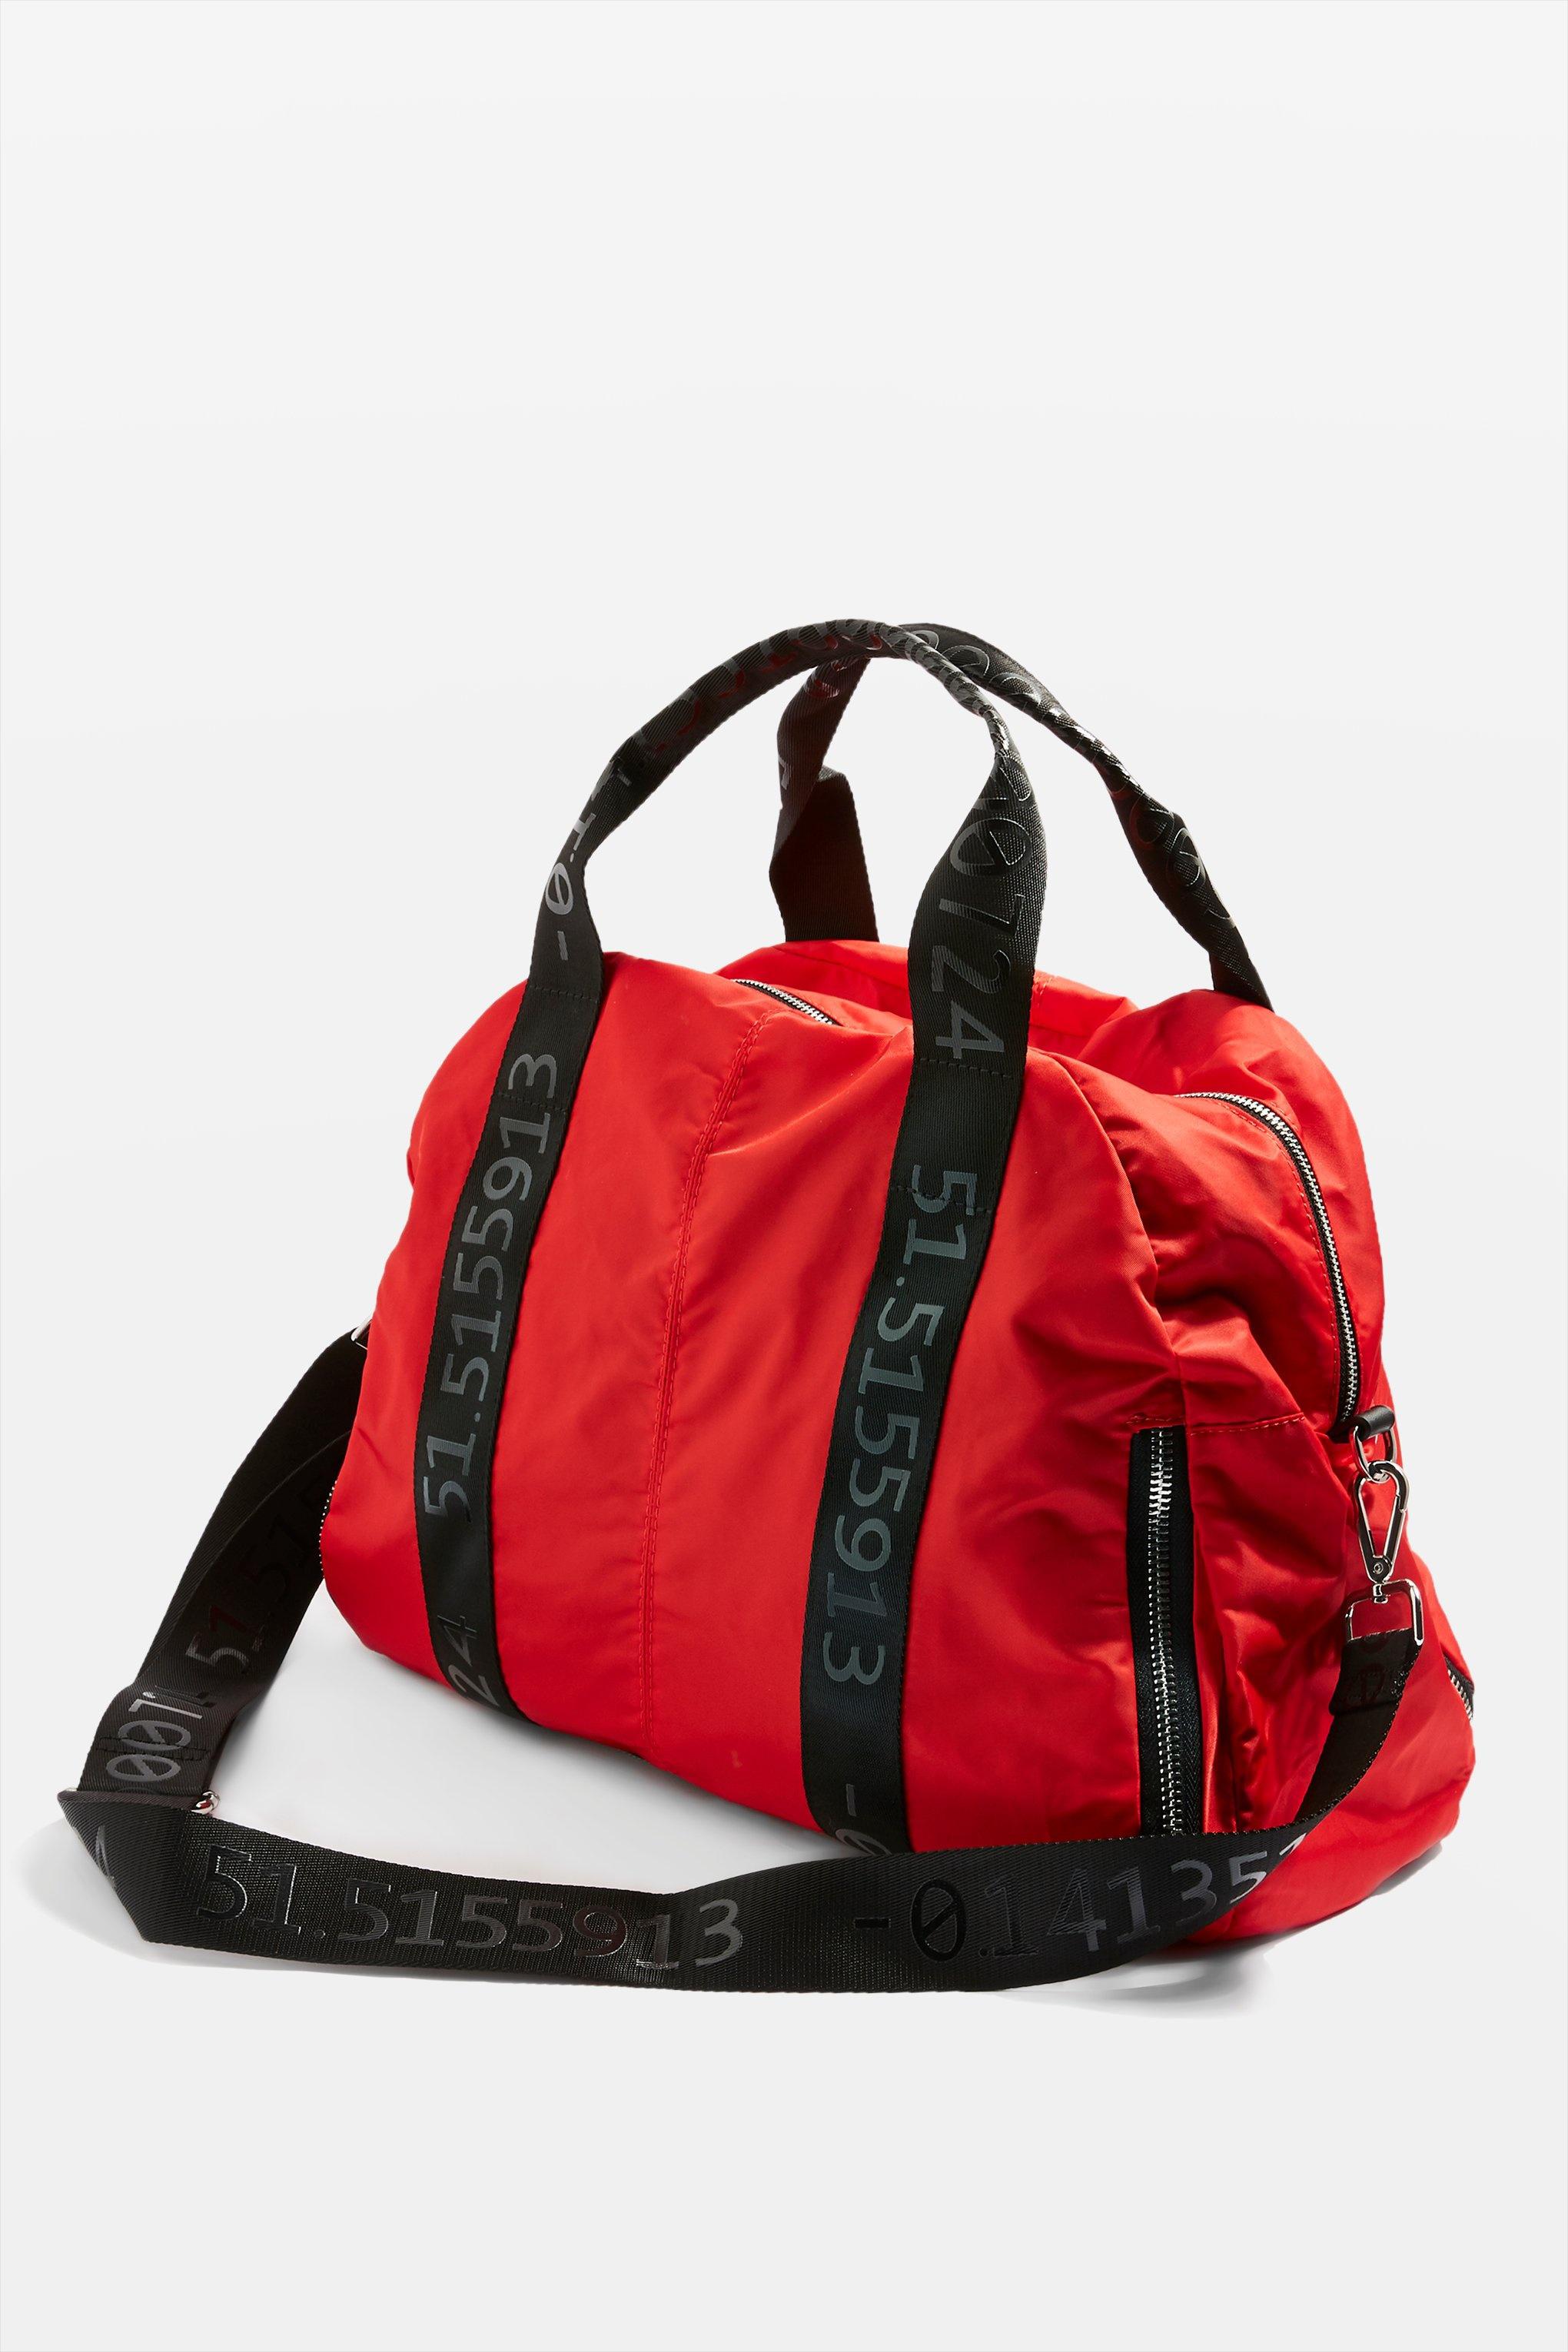 TOPSHOP Synthetic Tokyo Nylon Tote Bag in Red - Lyst